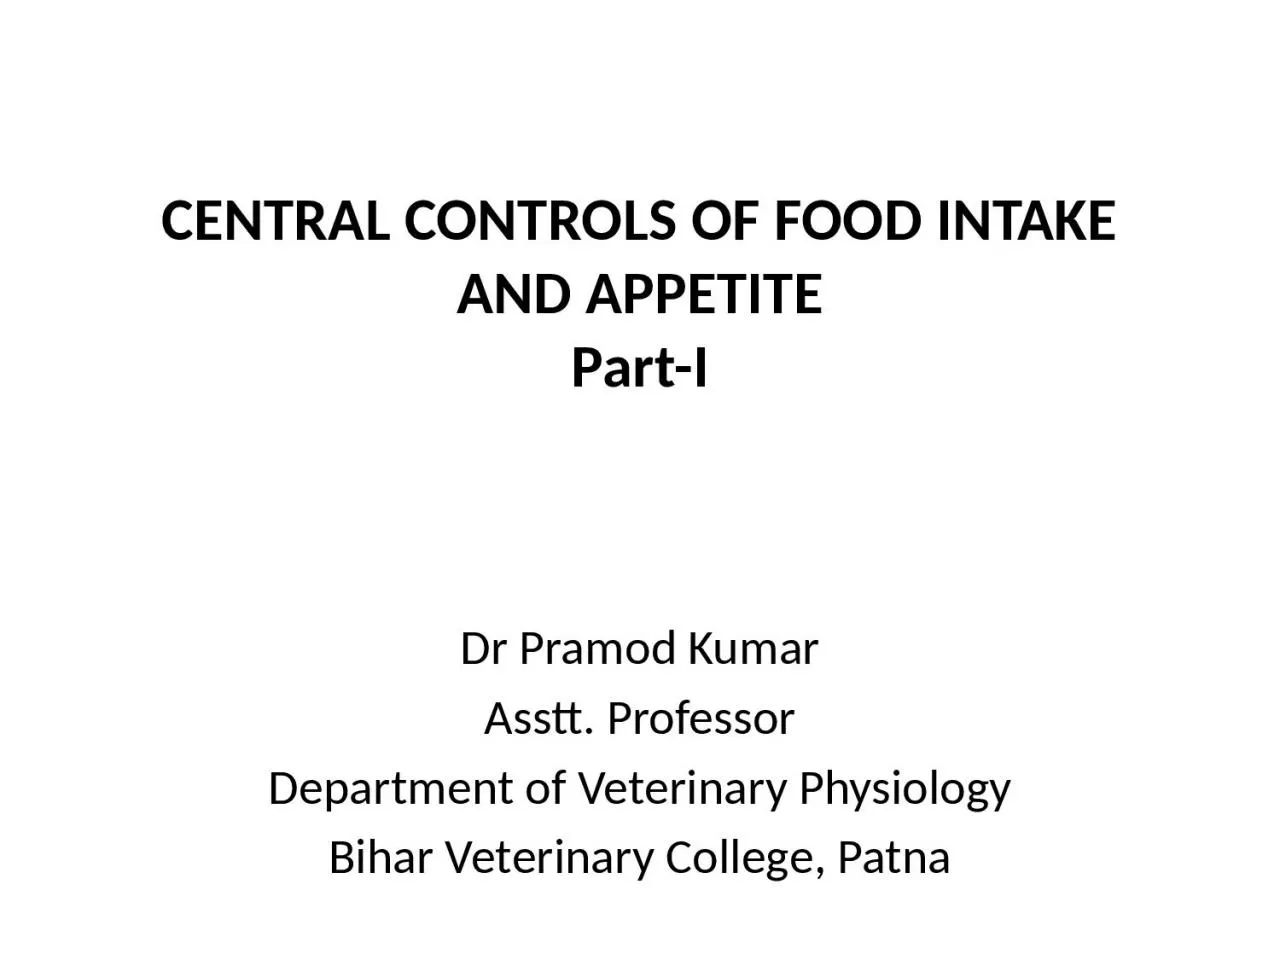 CENTRAL CONTROLS OF FOOD INTAKE AND APPETITE